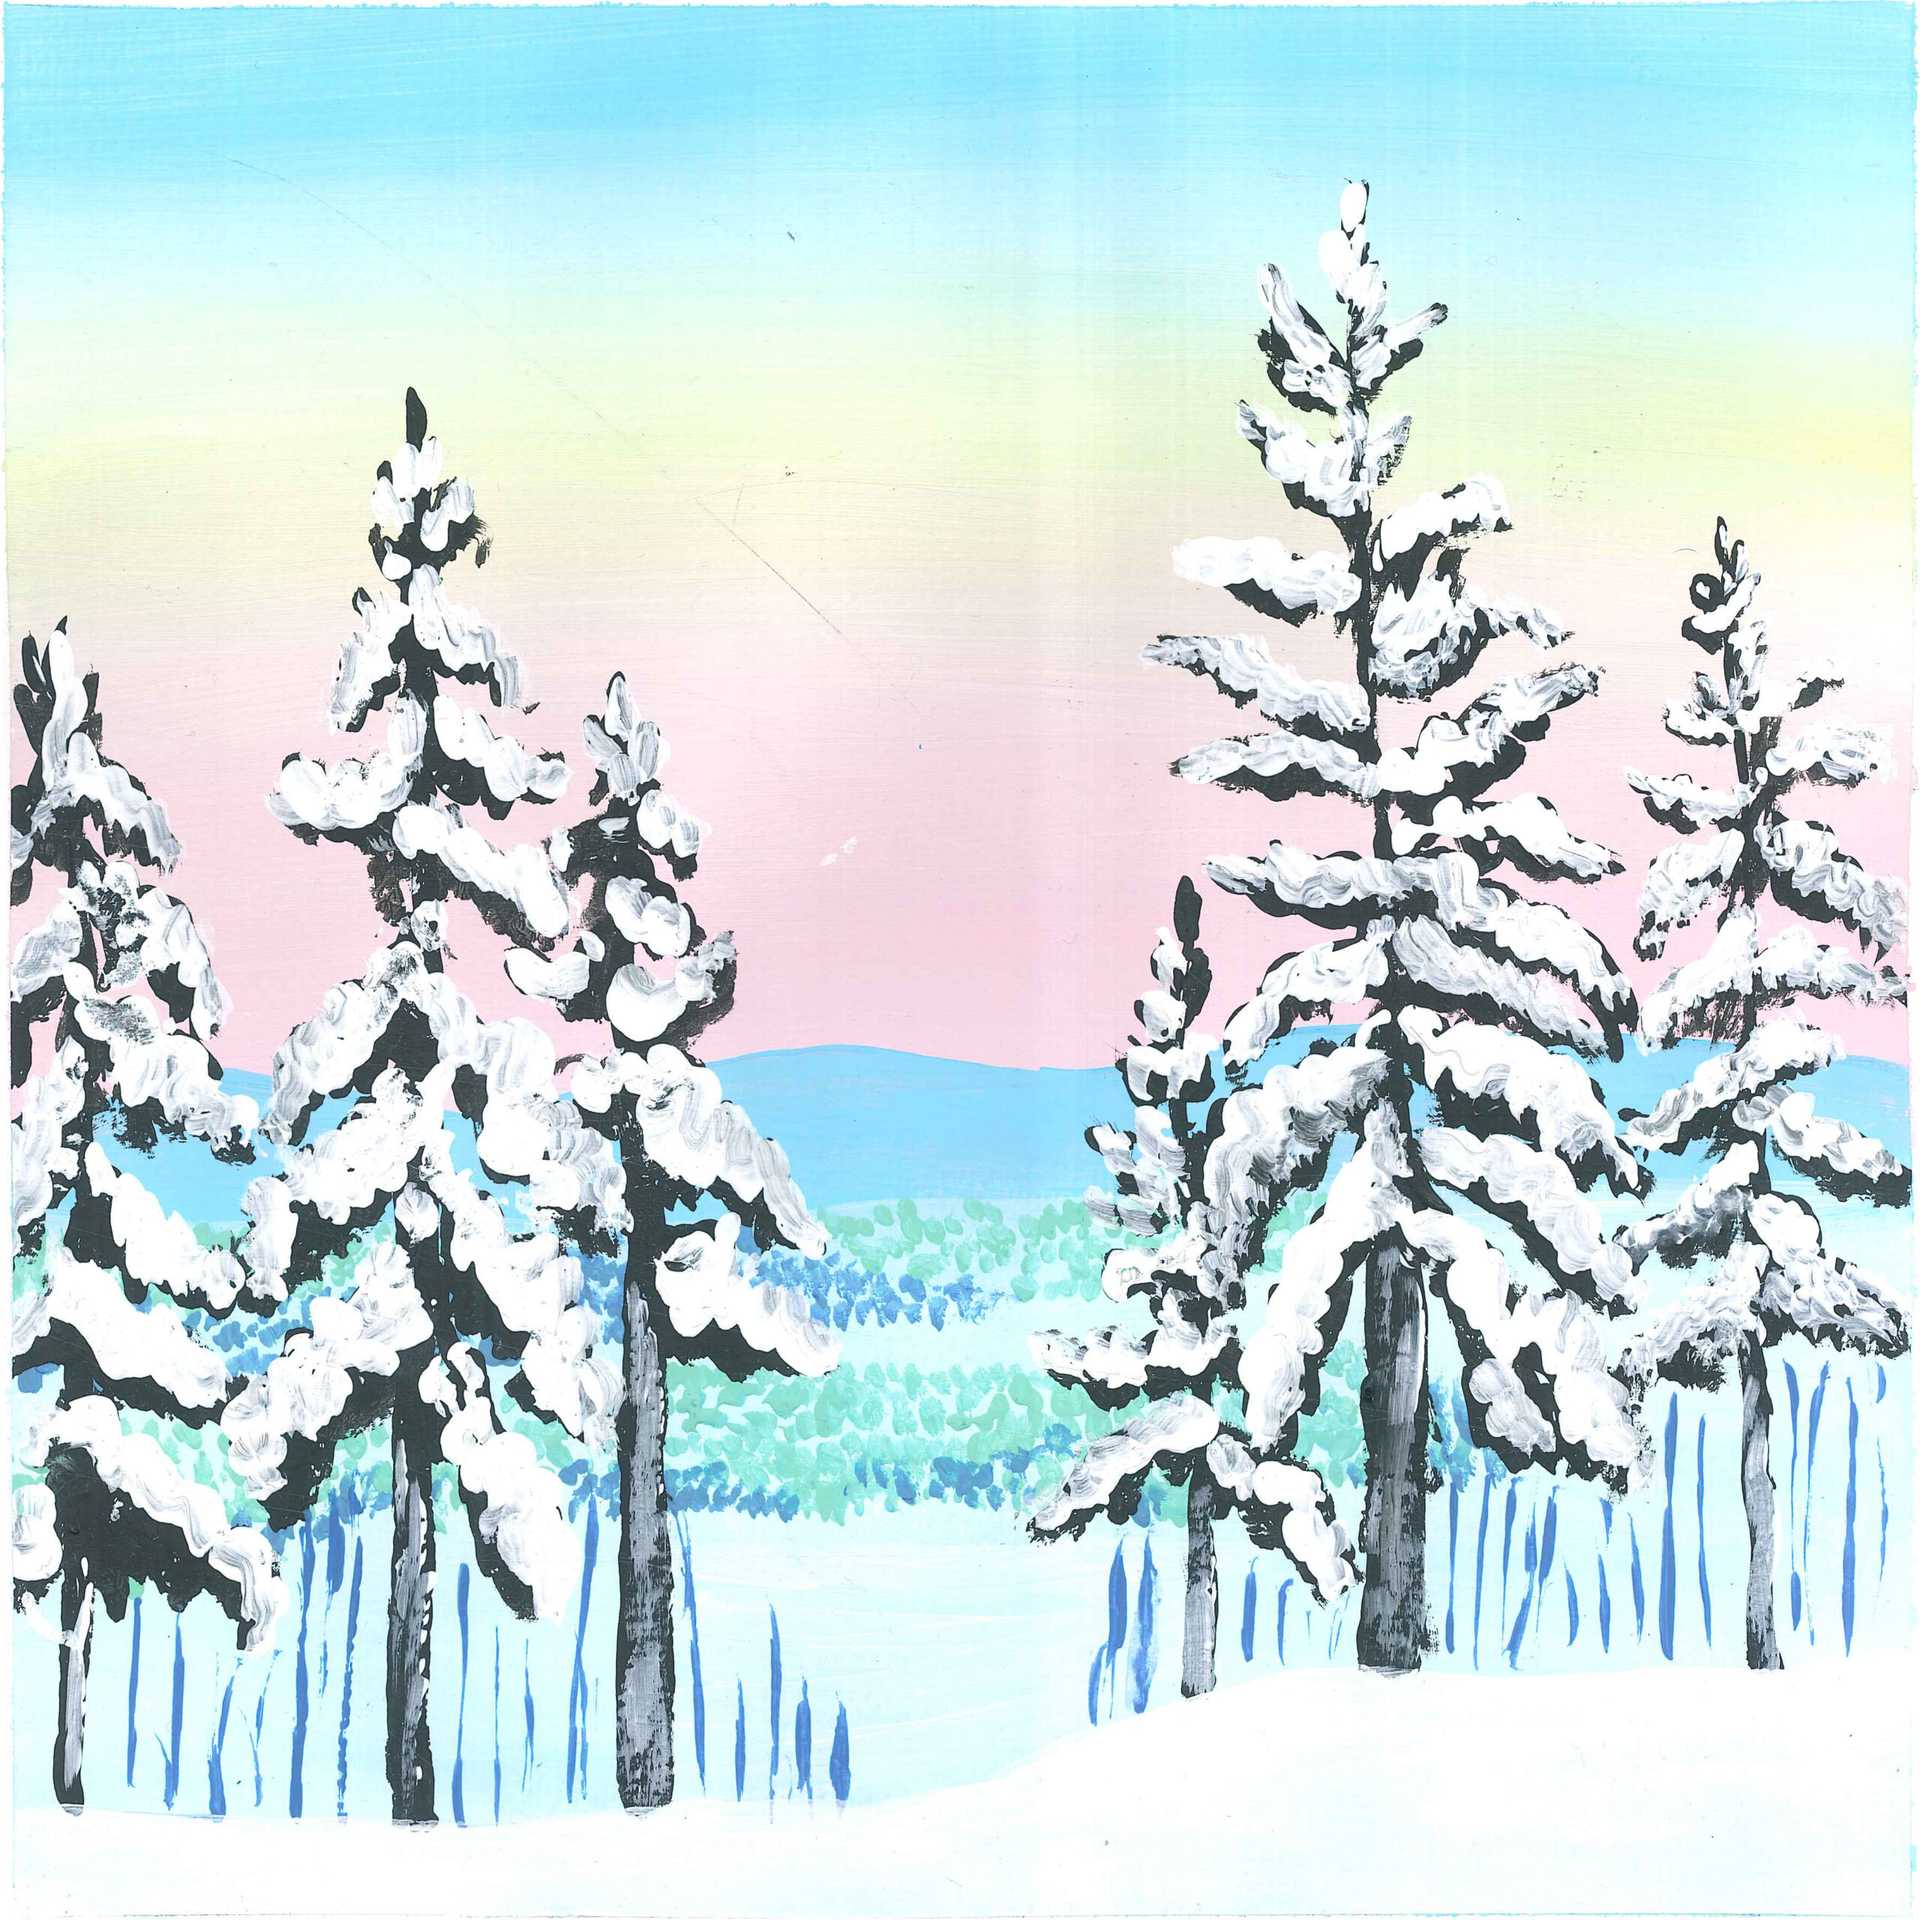 Falling Snow in the Forest - earth.fm